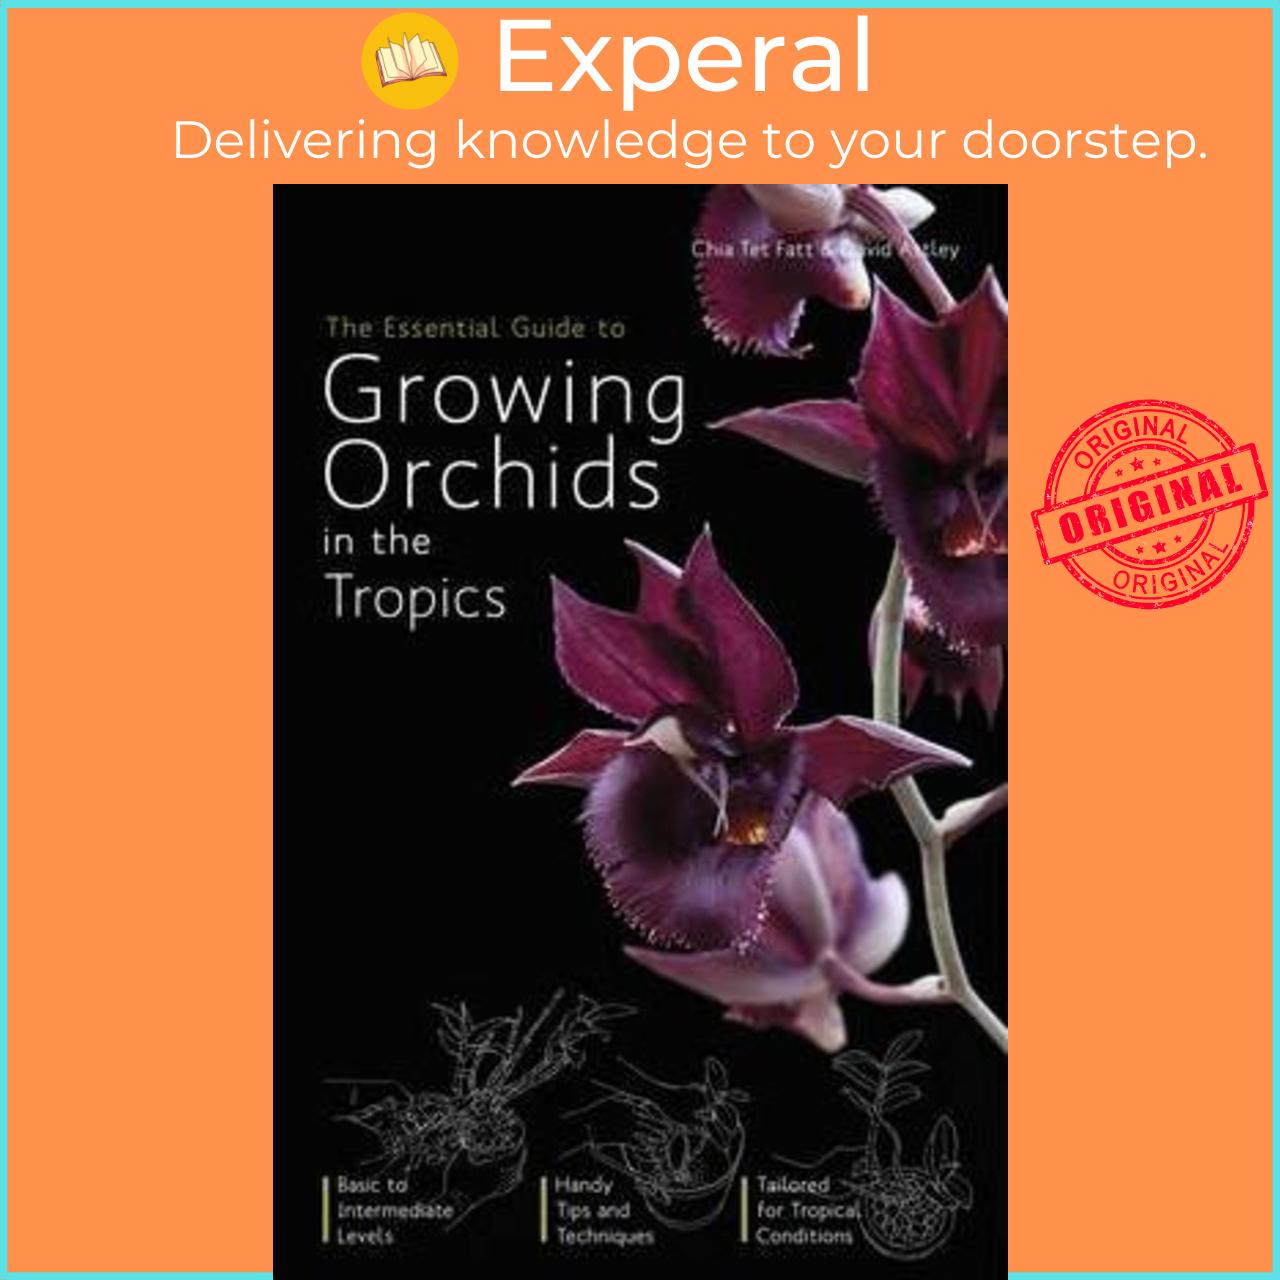 Hình ảnh Sách - The Essential Guide To Growing Orchids In The Tropics, by Tet Fatt Chia (paperback)